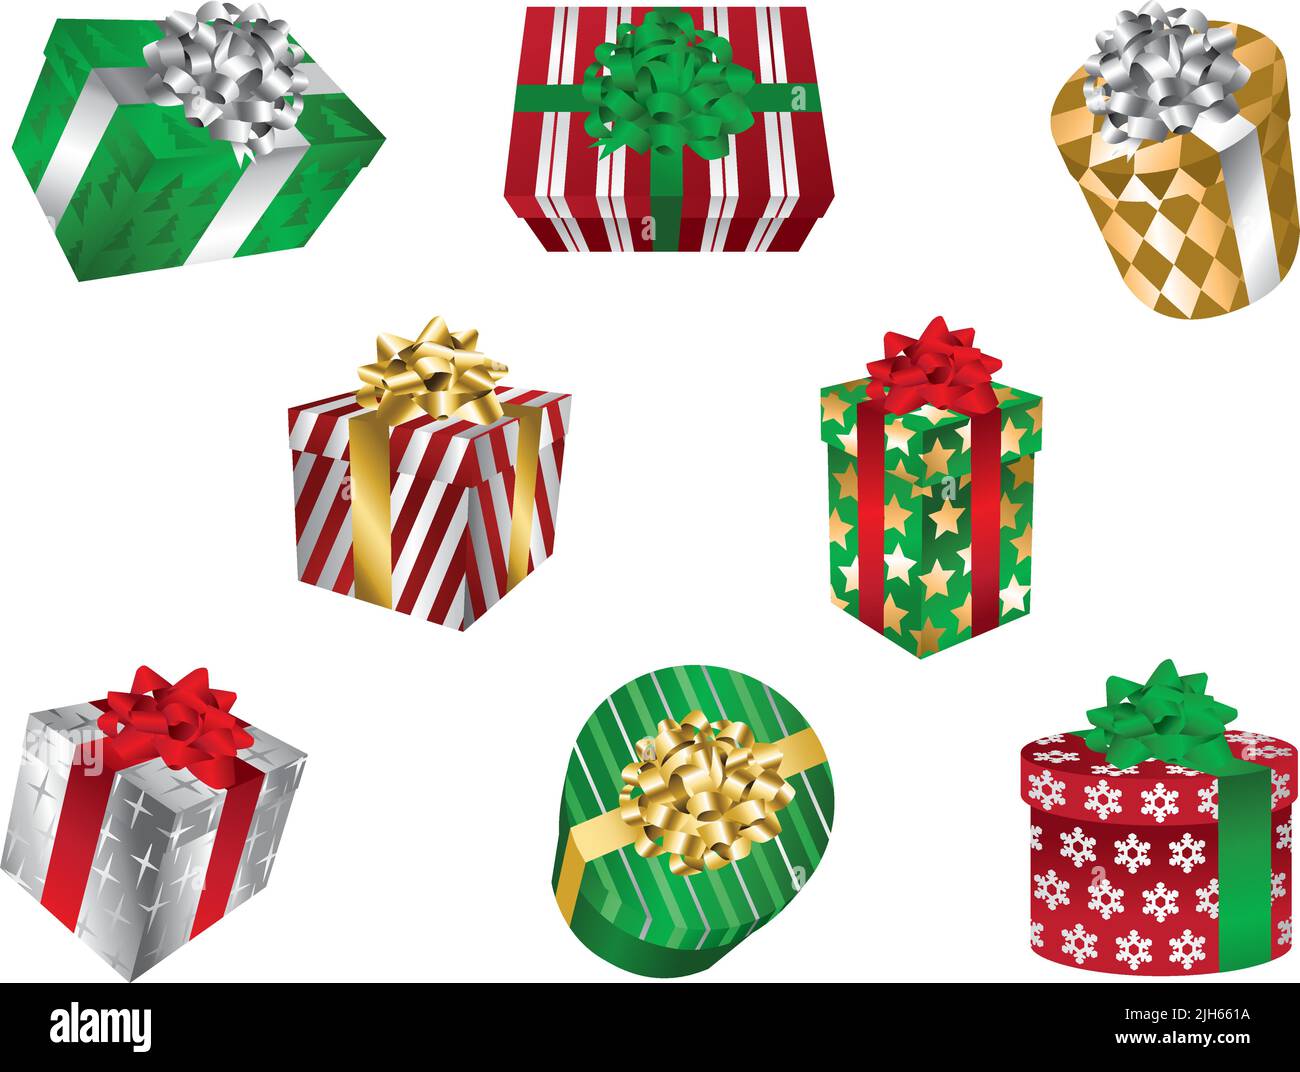 A set of vector illustrations of Christmas patterned gift boxes with bows and ribbons. Stock Vector